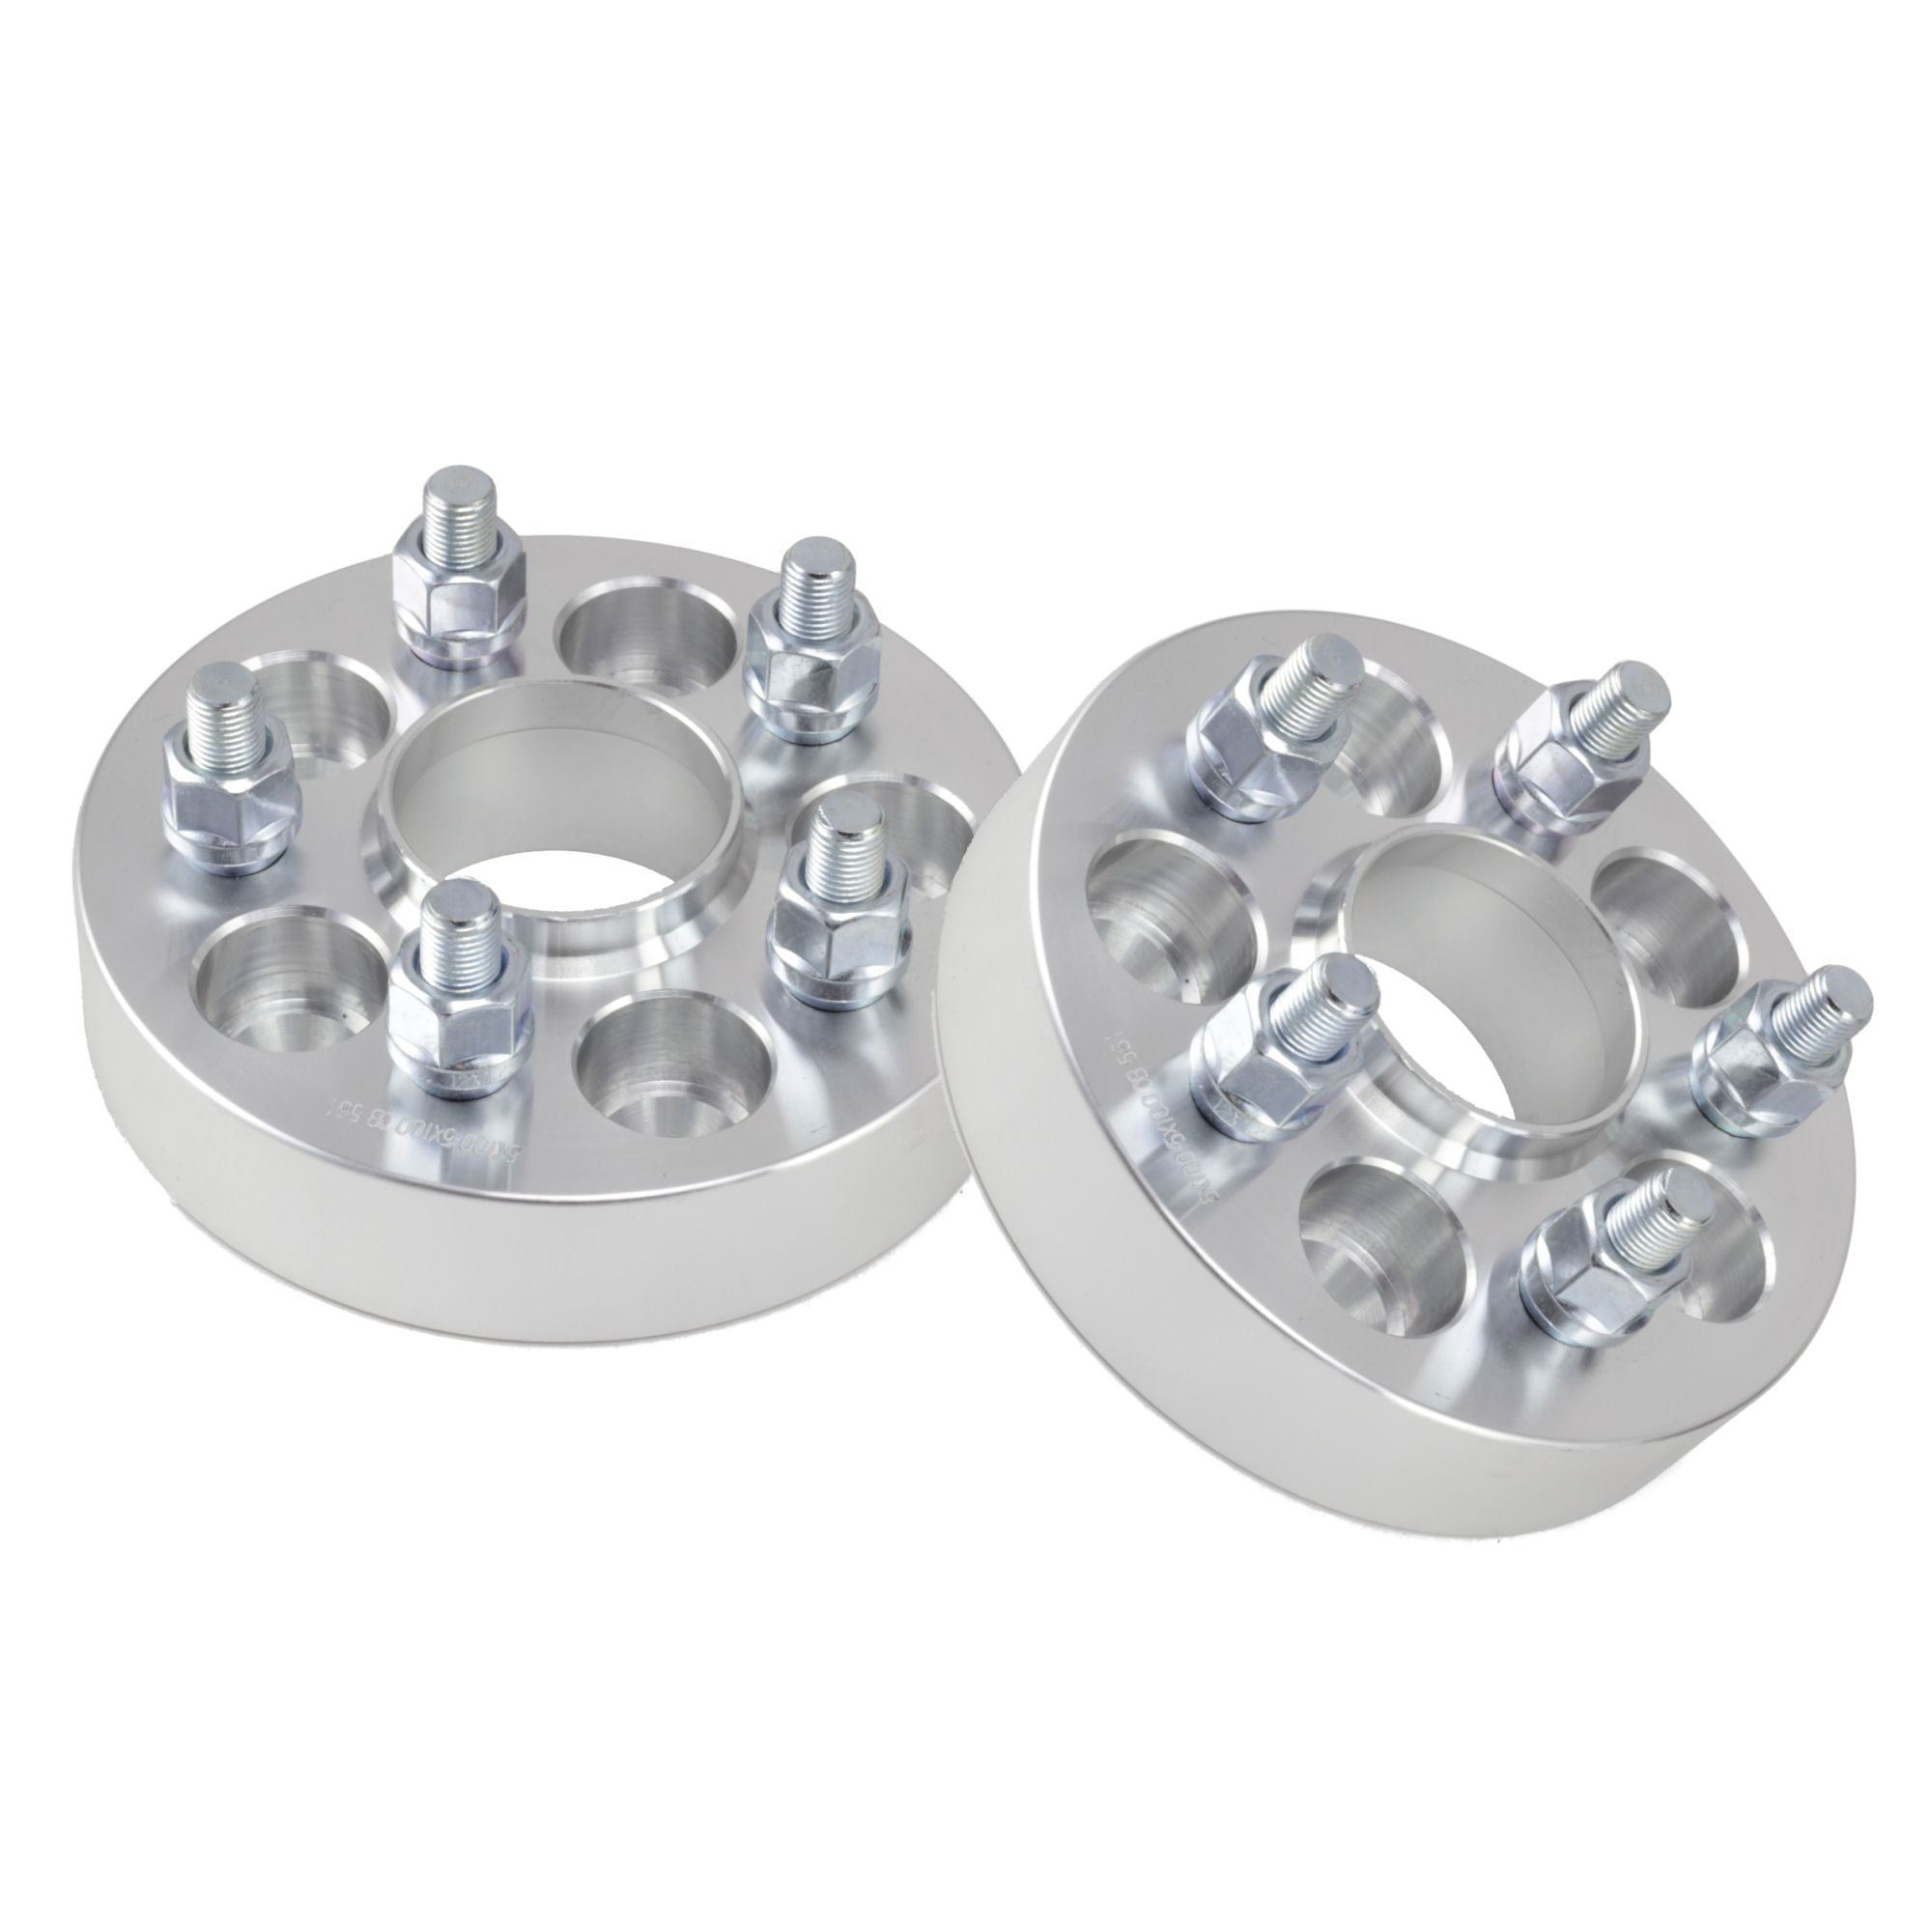 HUB CENTRIC 1" WHEEL ADAPTERS SPACERS 5x100 FOR TOYOTA PRIUS SCION TC XD 25mm 